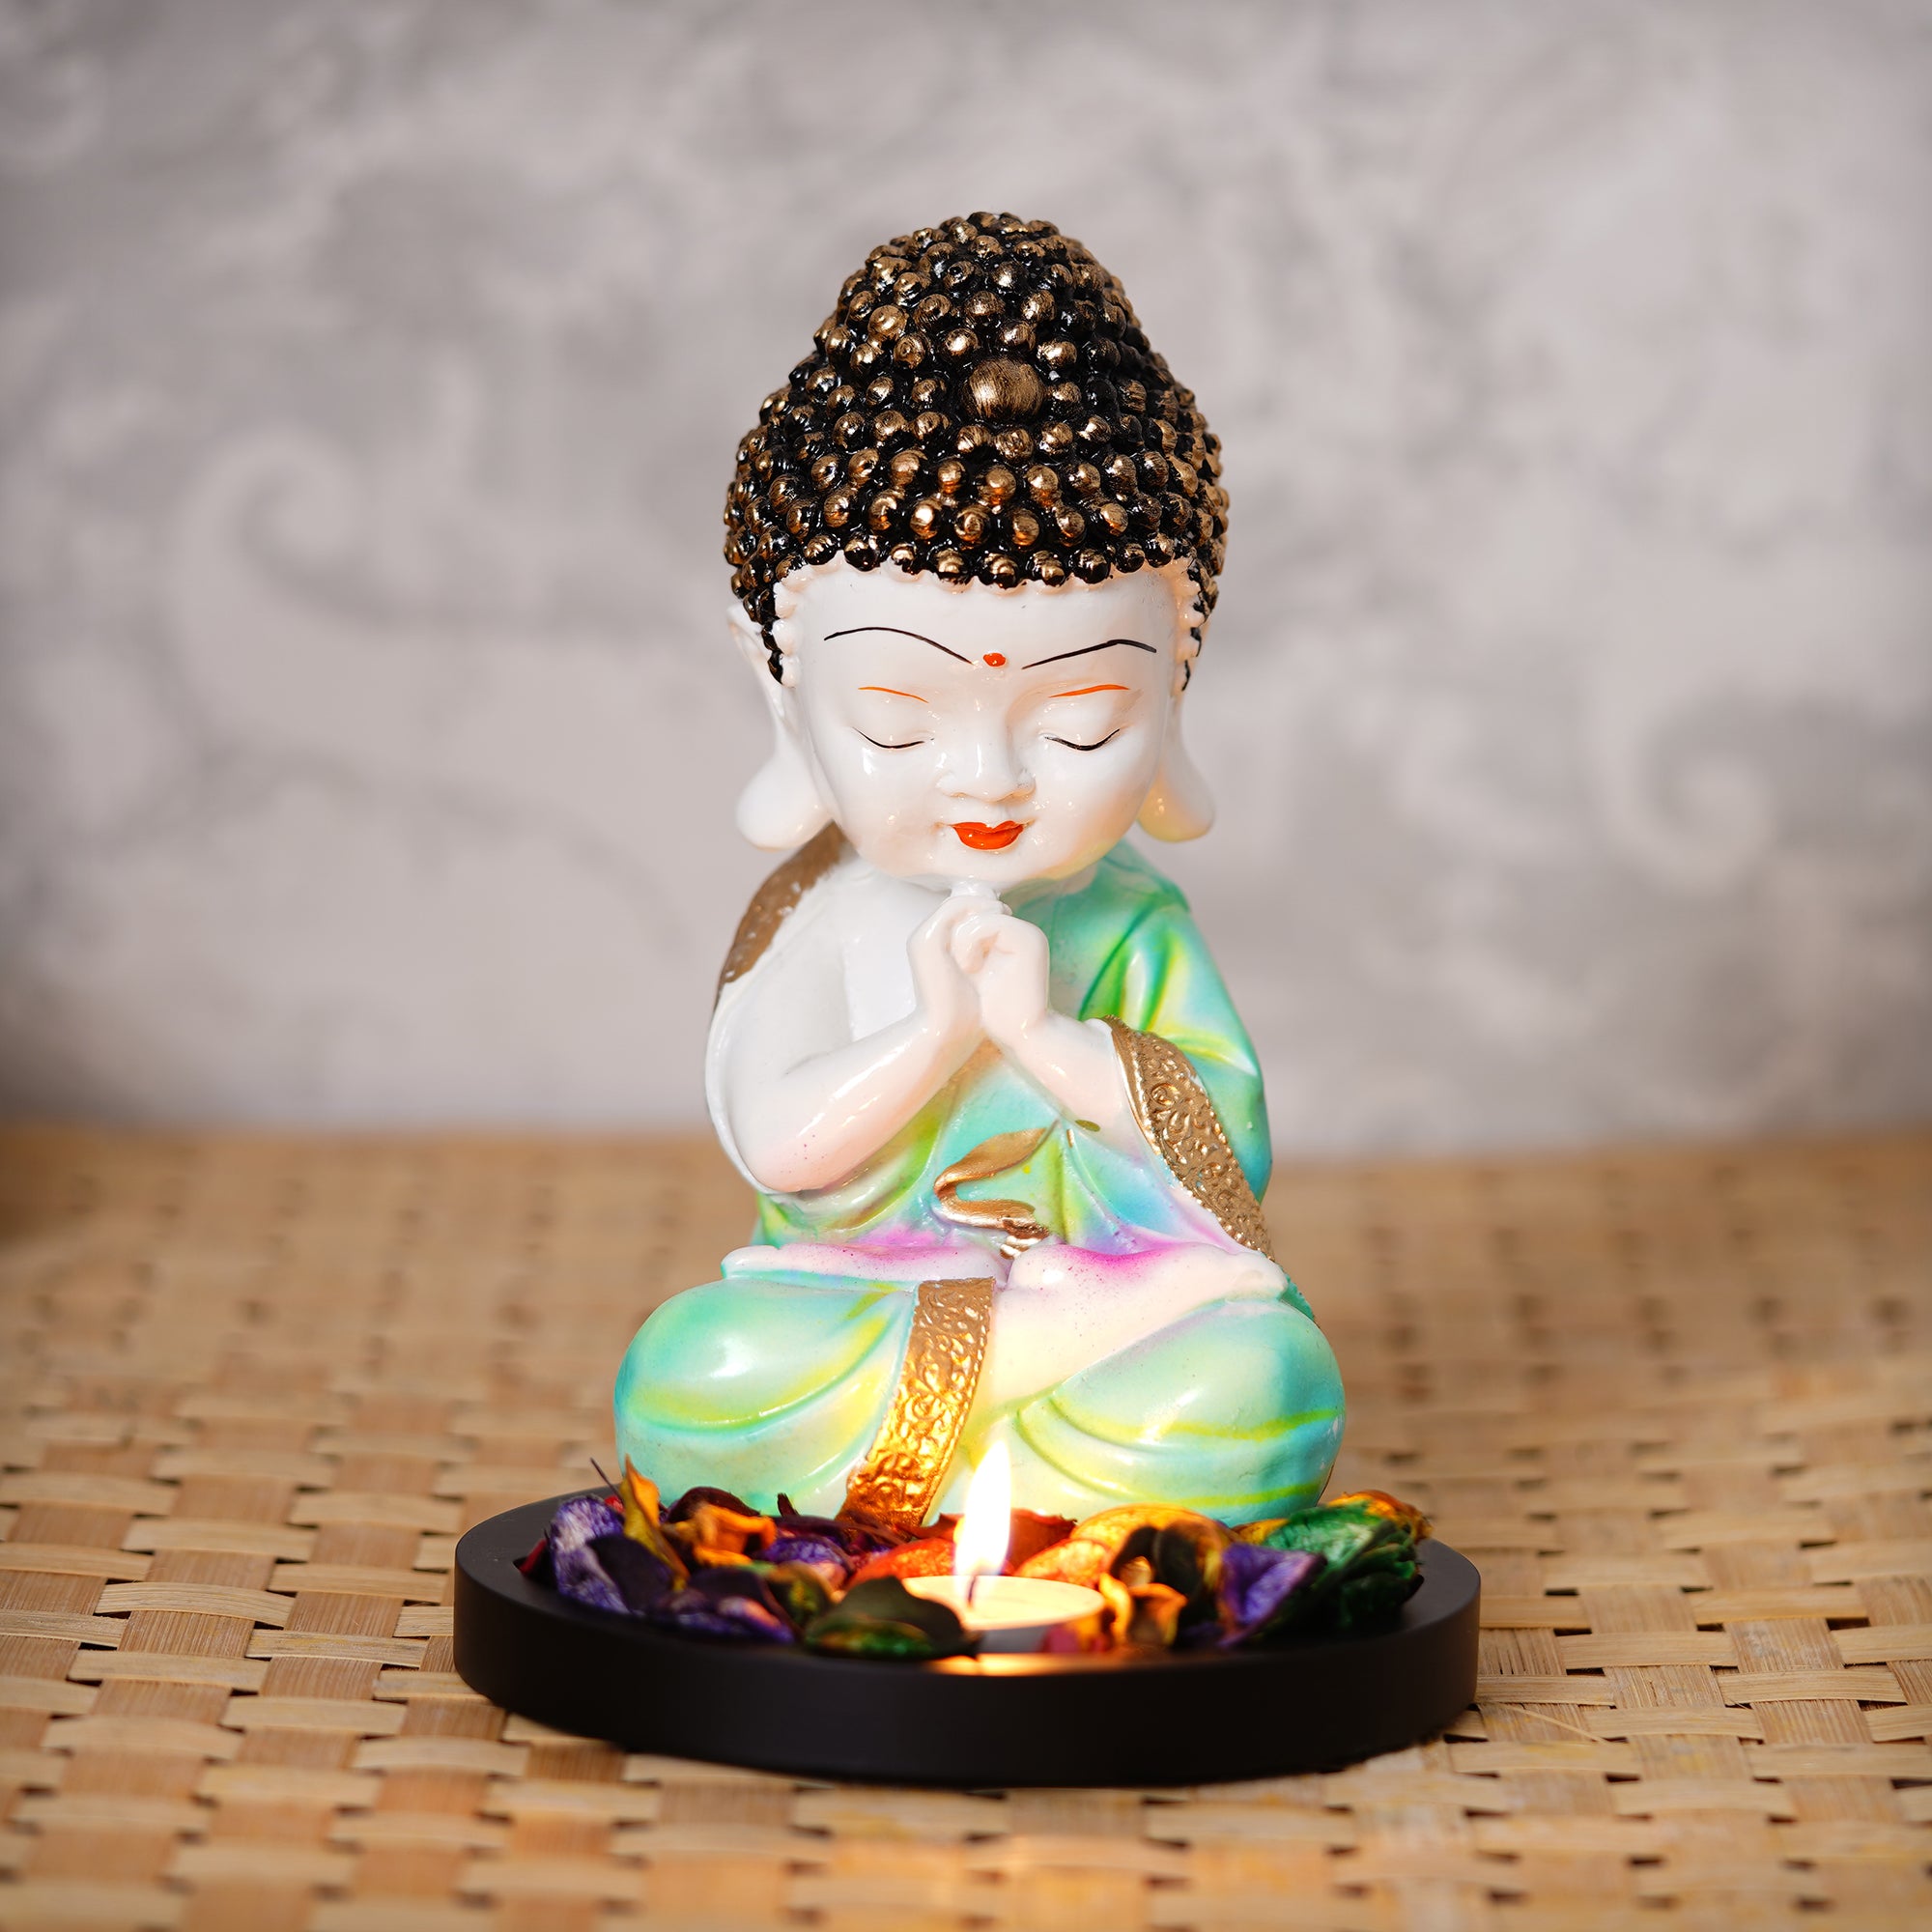 Polyresin Green and White Praying Monk Buddha Statue with Wooden Base, Fragranced Petals and Tealight